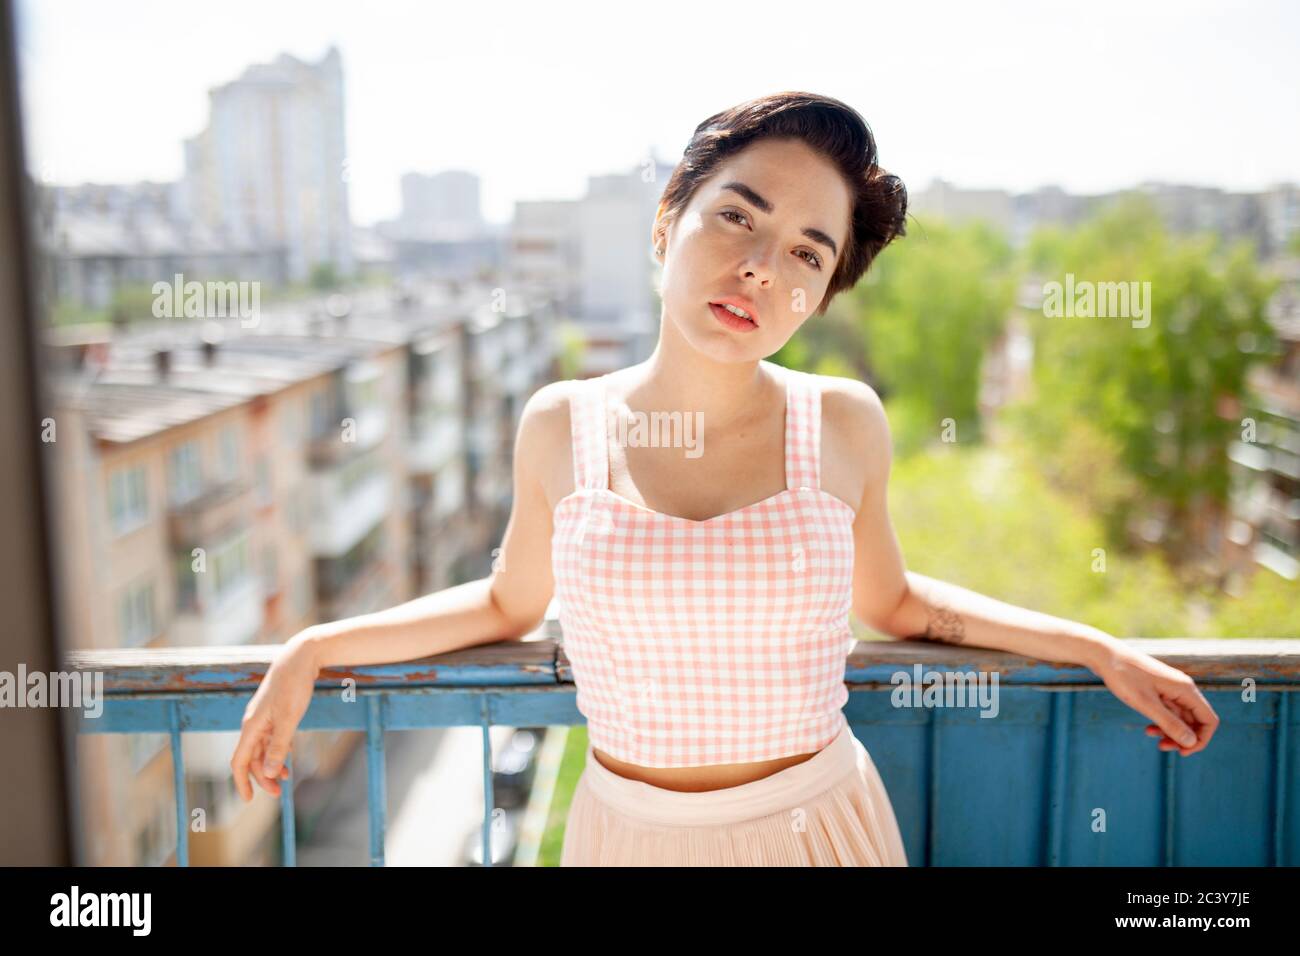 Russia, Novosibirsk, Portrait of young woman on balcony Stock Photo